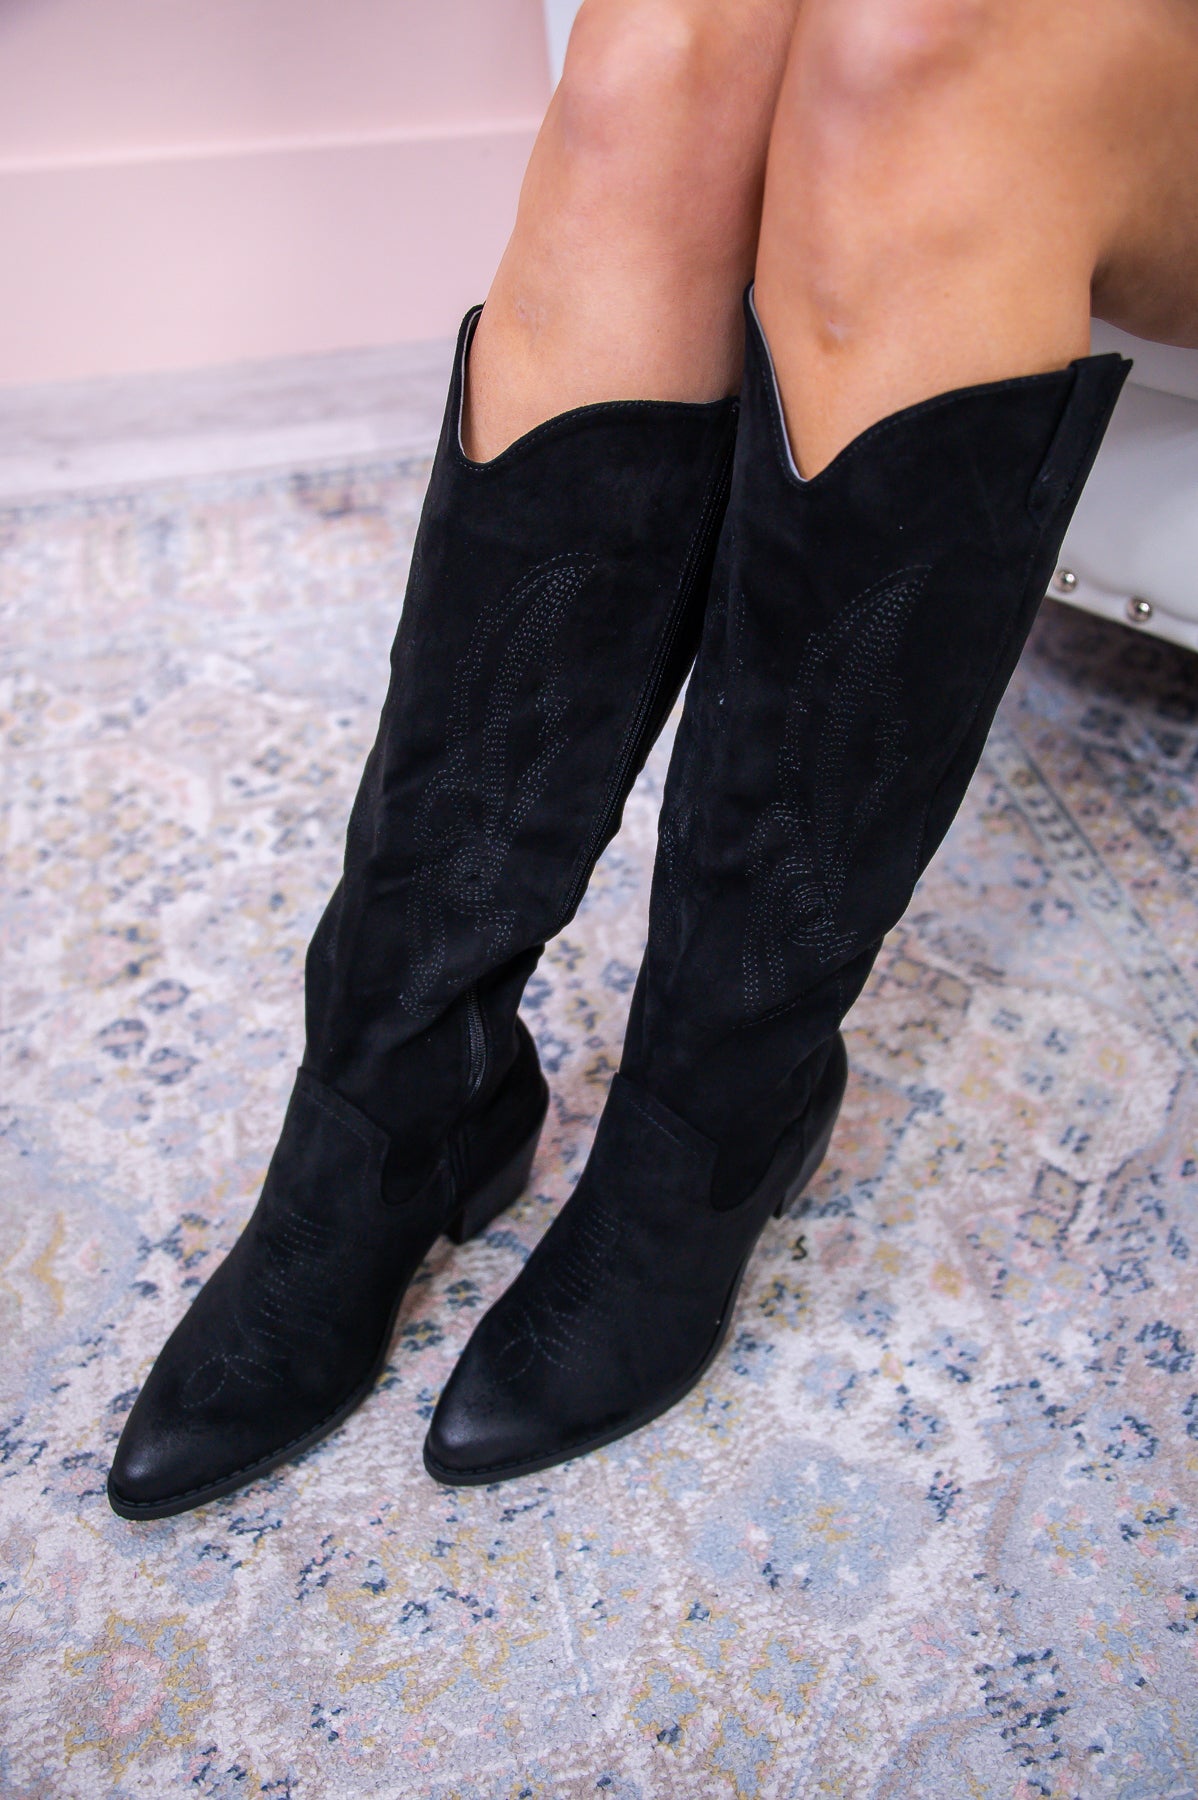 Boots Class And A Little Sass Black Solid Suede Cowgirl Boots - SHO2630BK